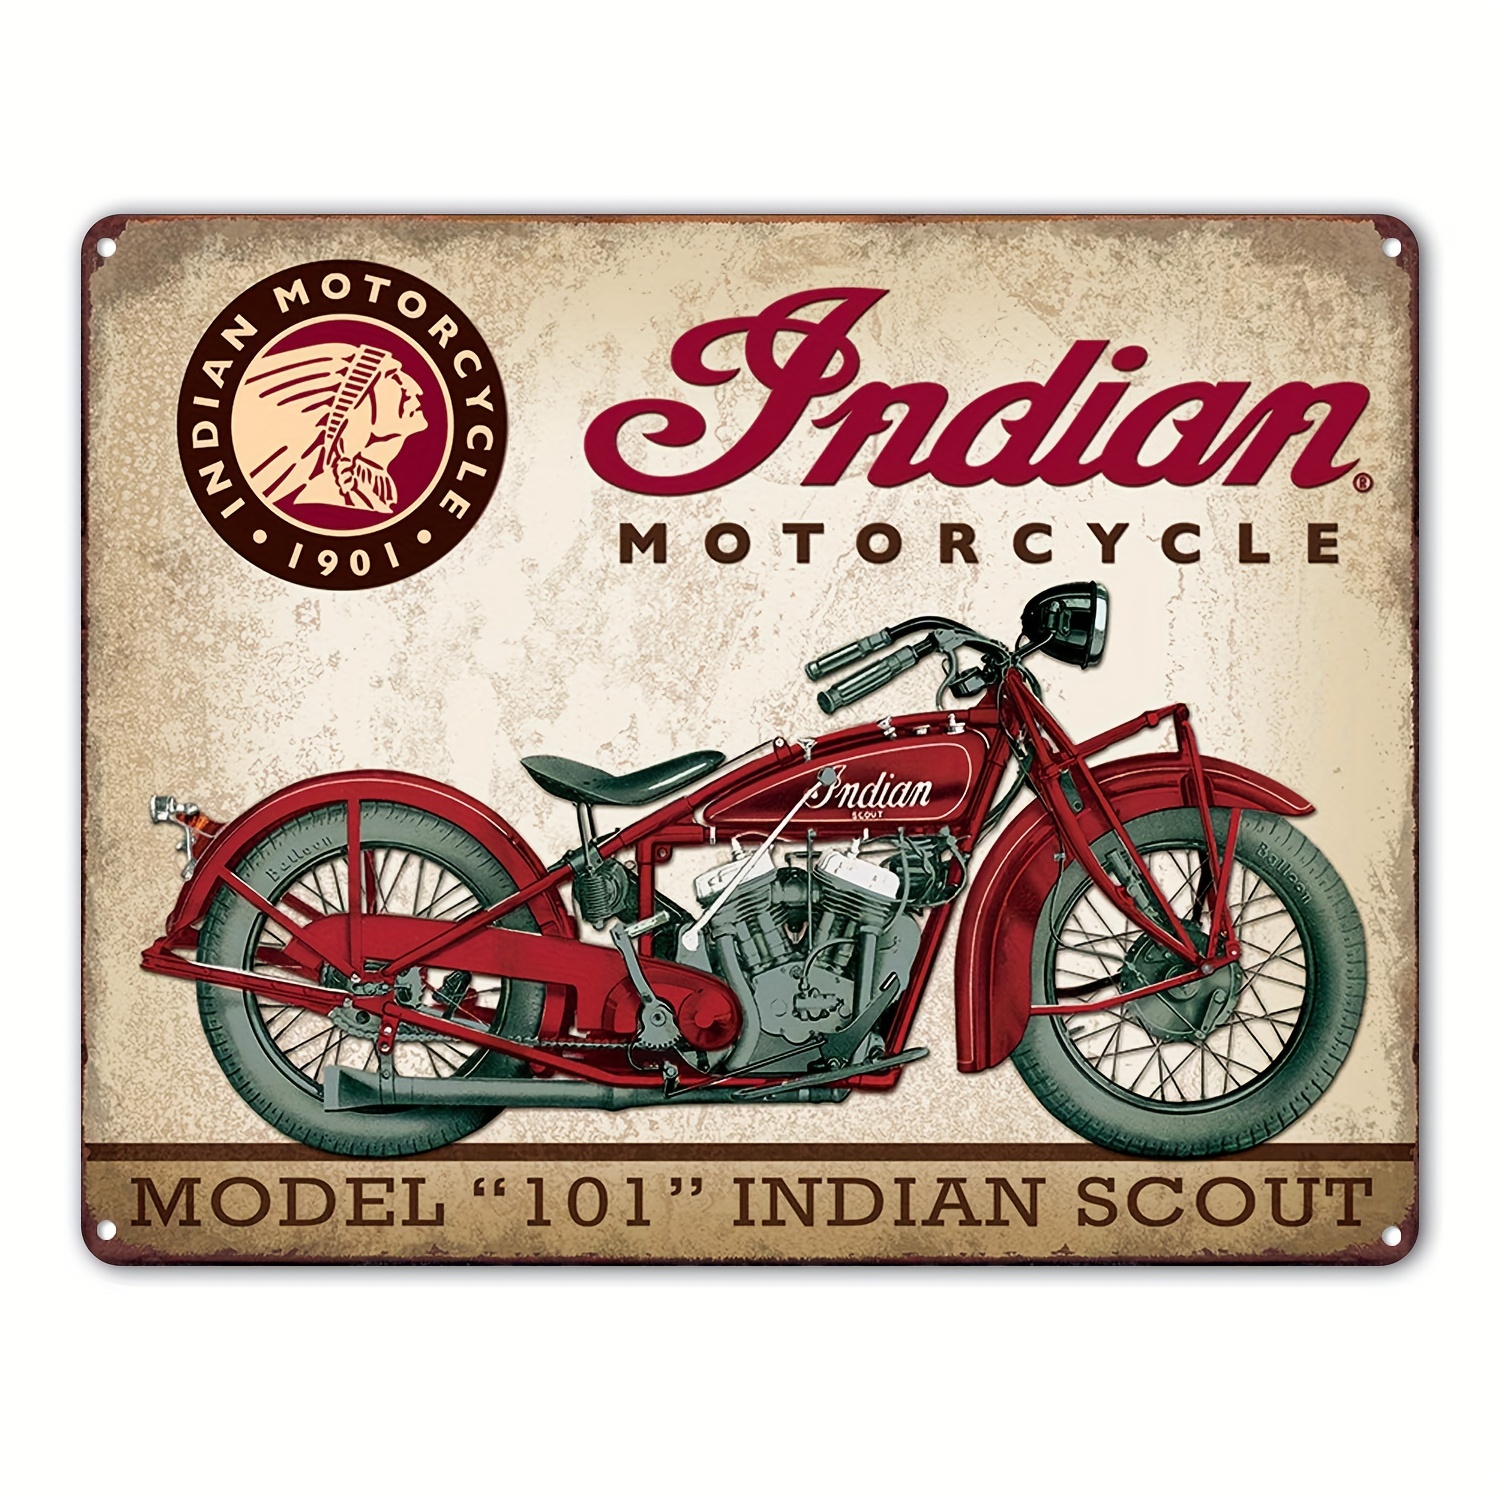 

1pc Vintage Indian Scout Motorcycle Tin Sign Nostalgic Vintage Metal Wall Decor Metal Tin Sign Wall Decor For Home Kitchen Bar Room Garage Poster Plaque 12x8 Inches Club Metal Sign